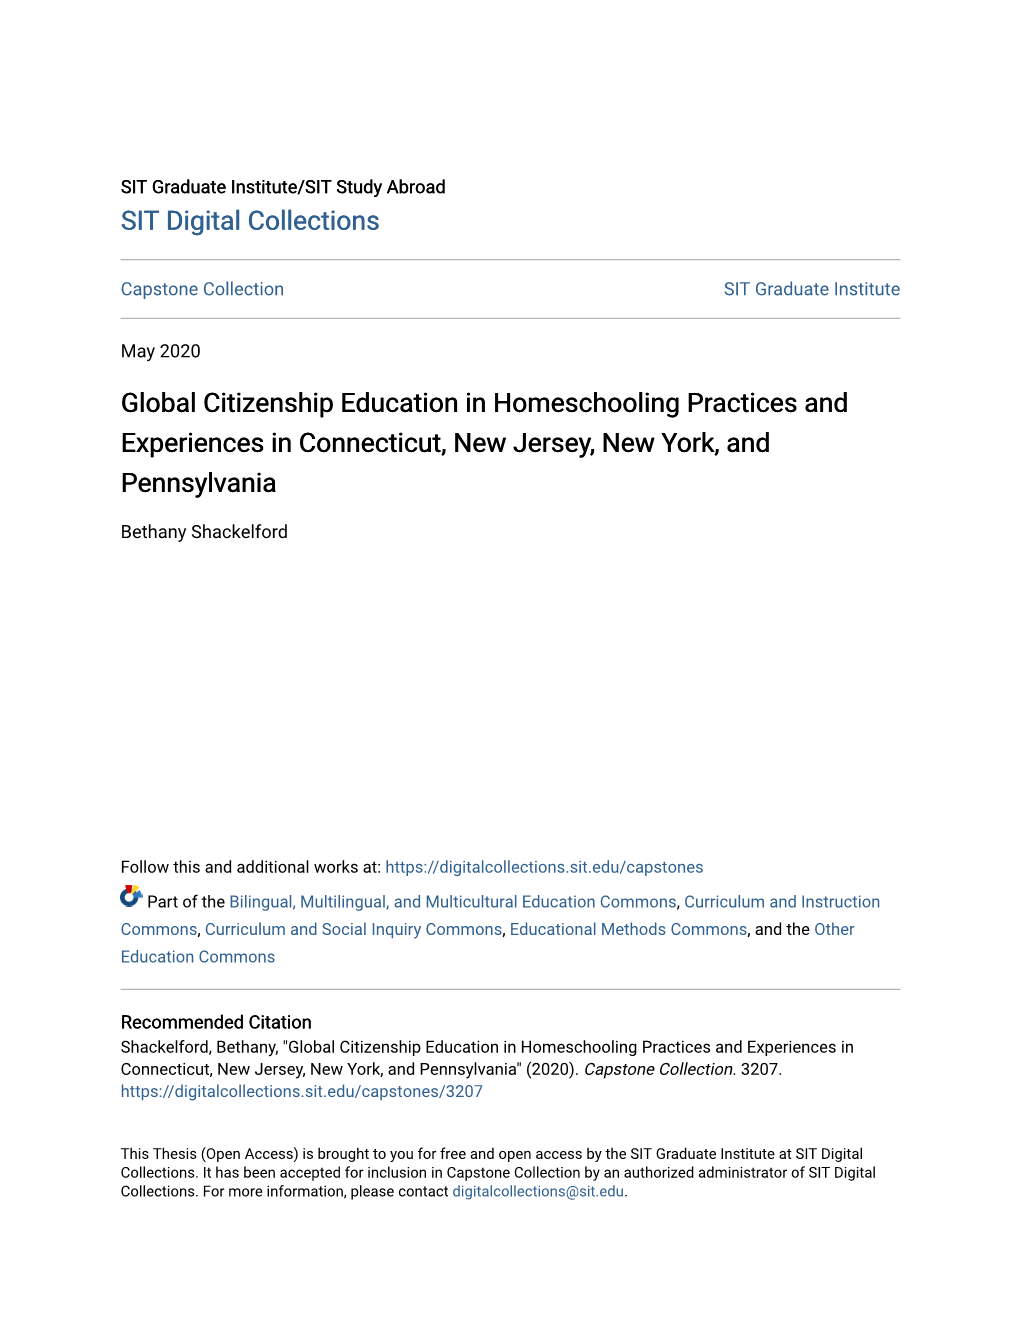 Global Citizenship Education in Homeschooling Practices and Experiences in Connecticut, New Jersey, New York, and Pennsylvania